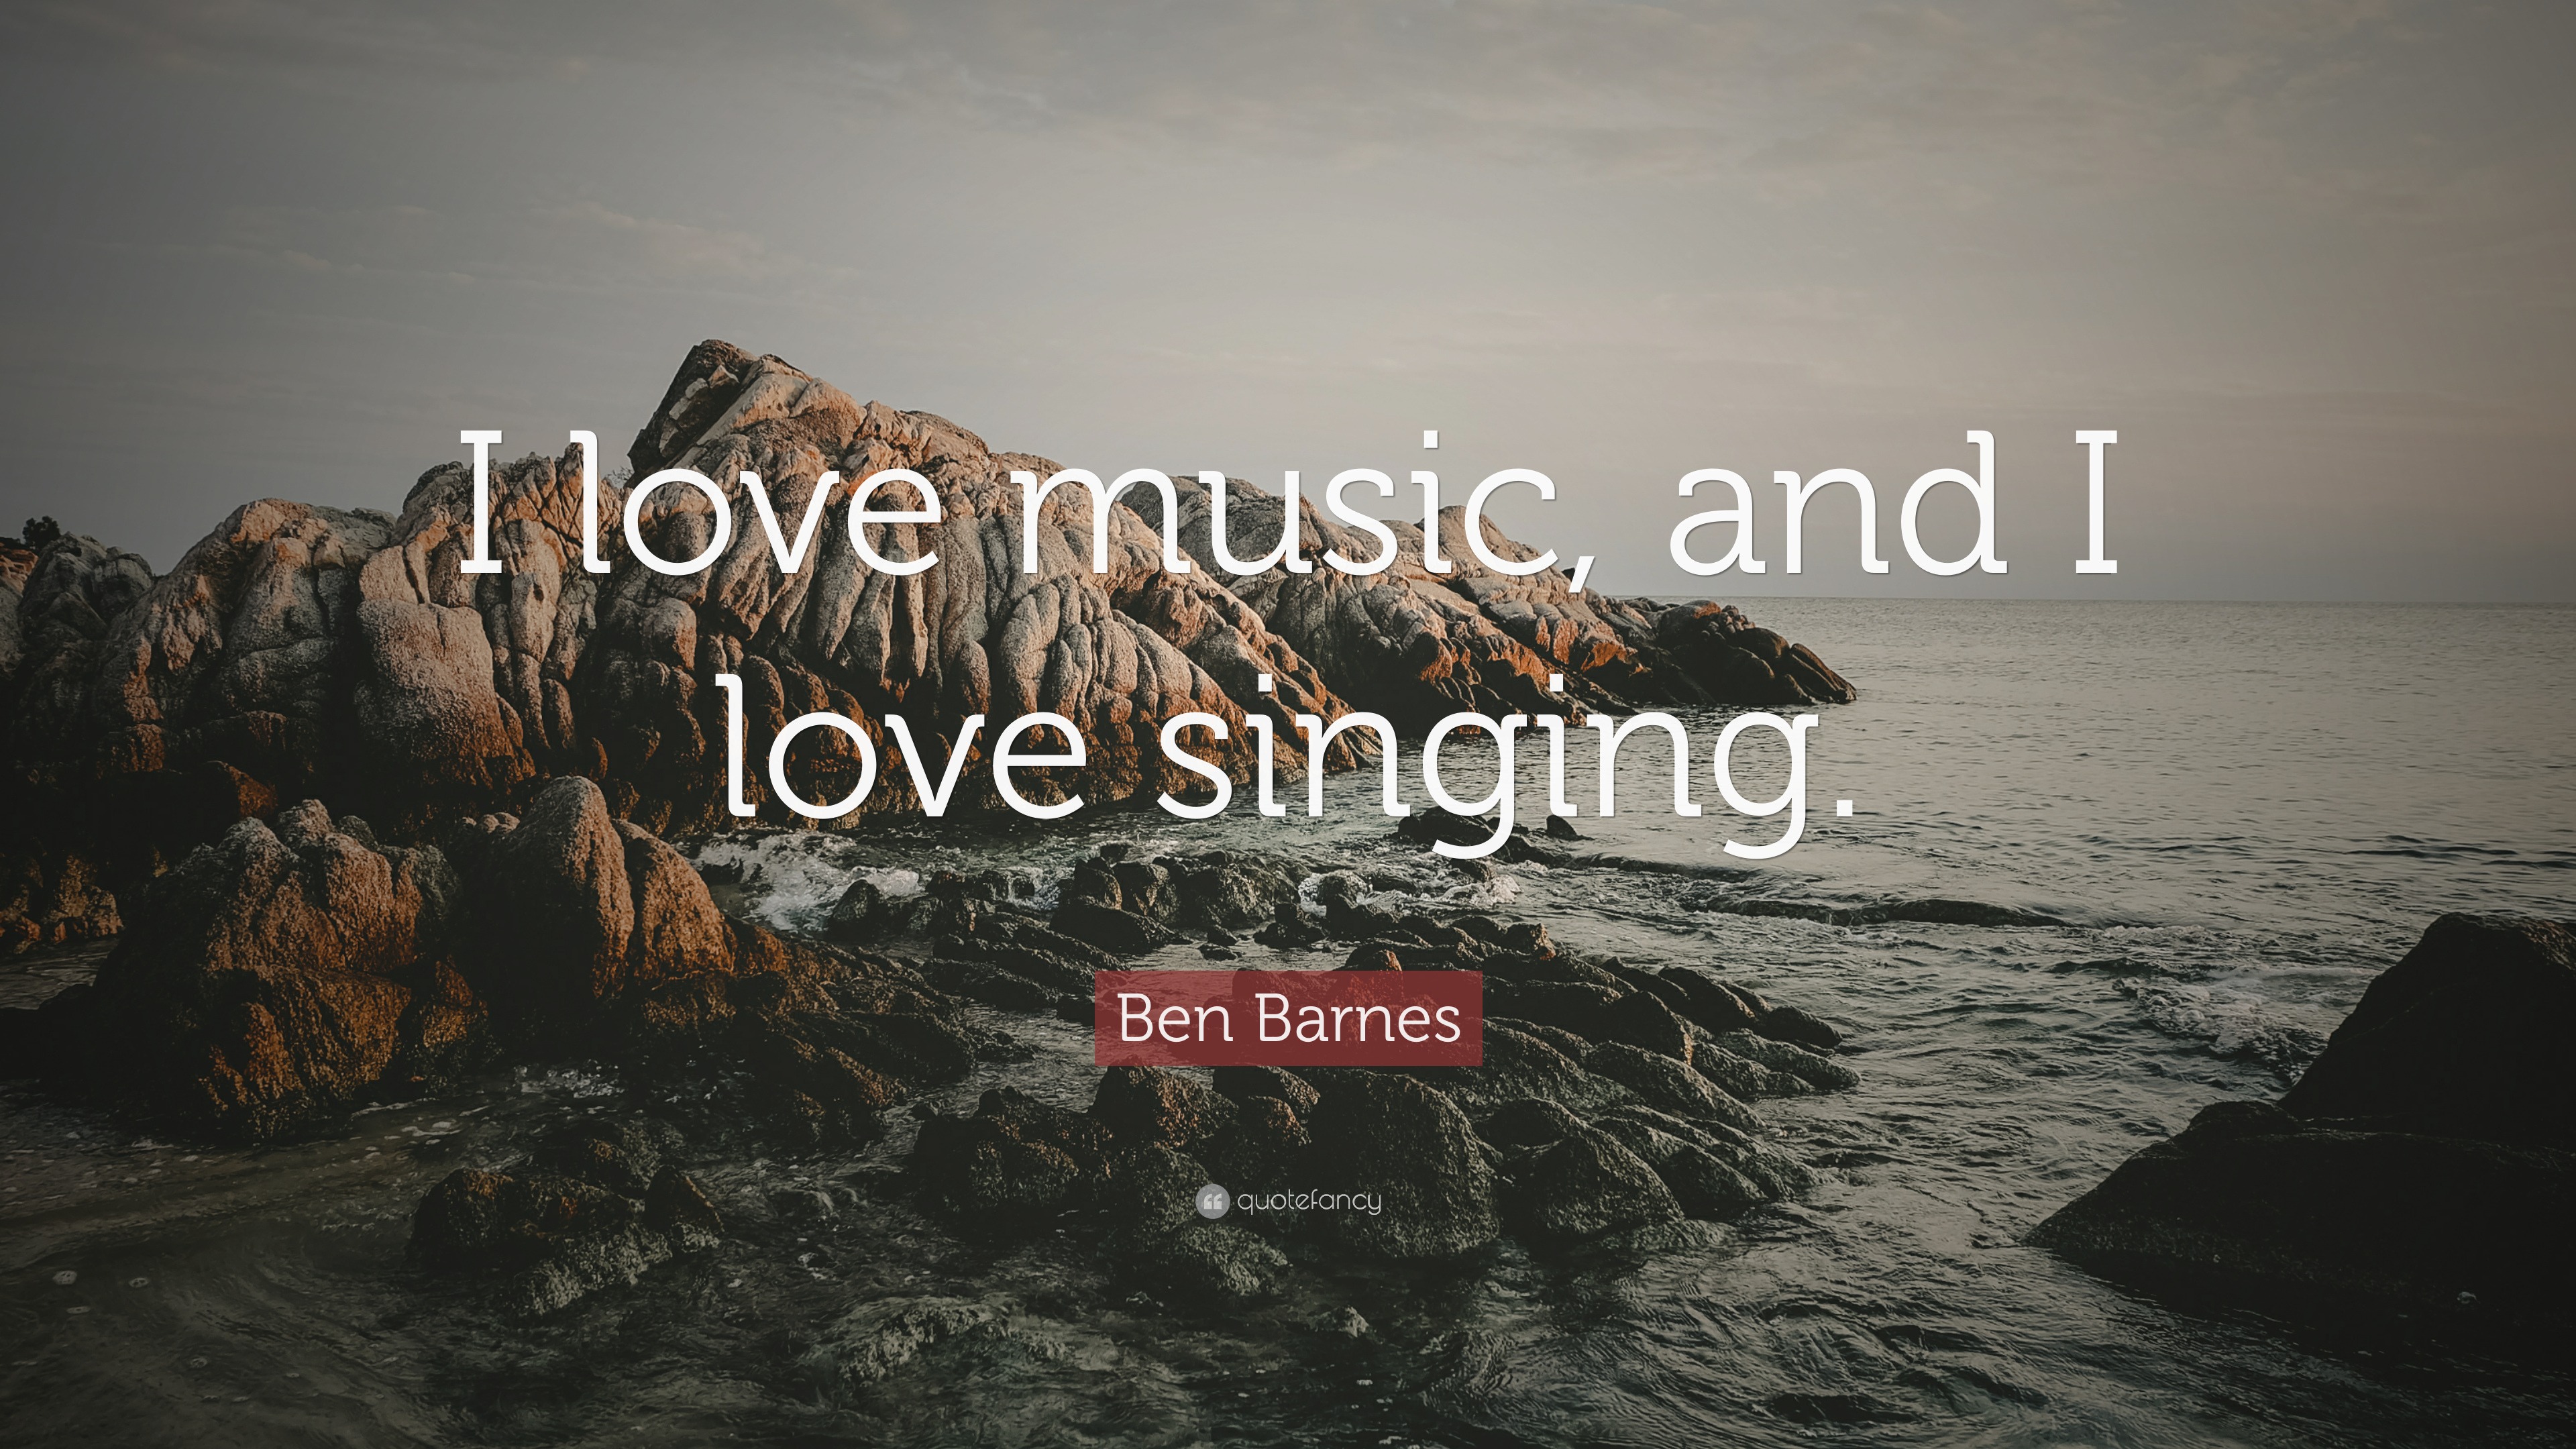 tumblr quotes about music and love